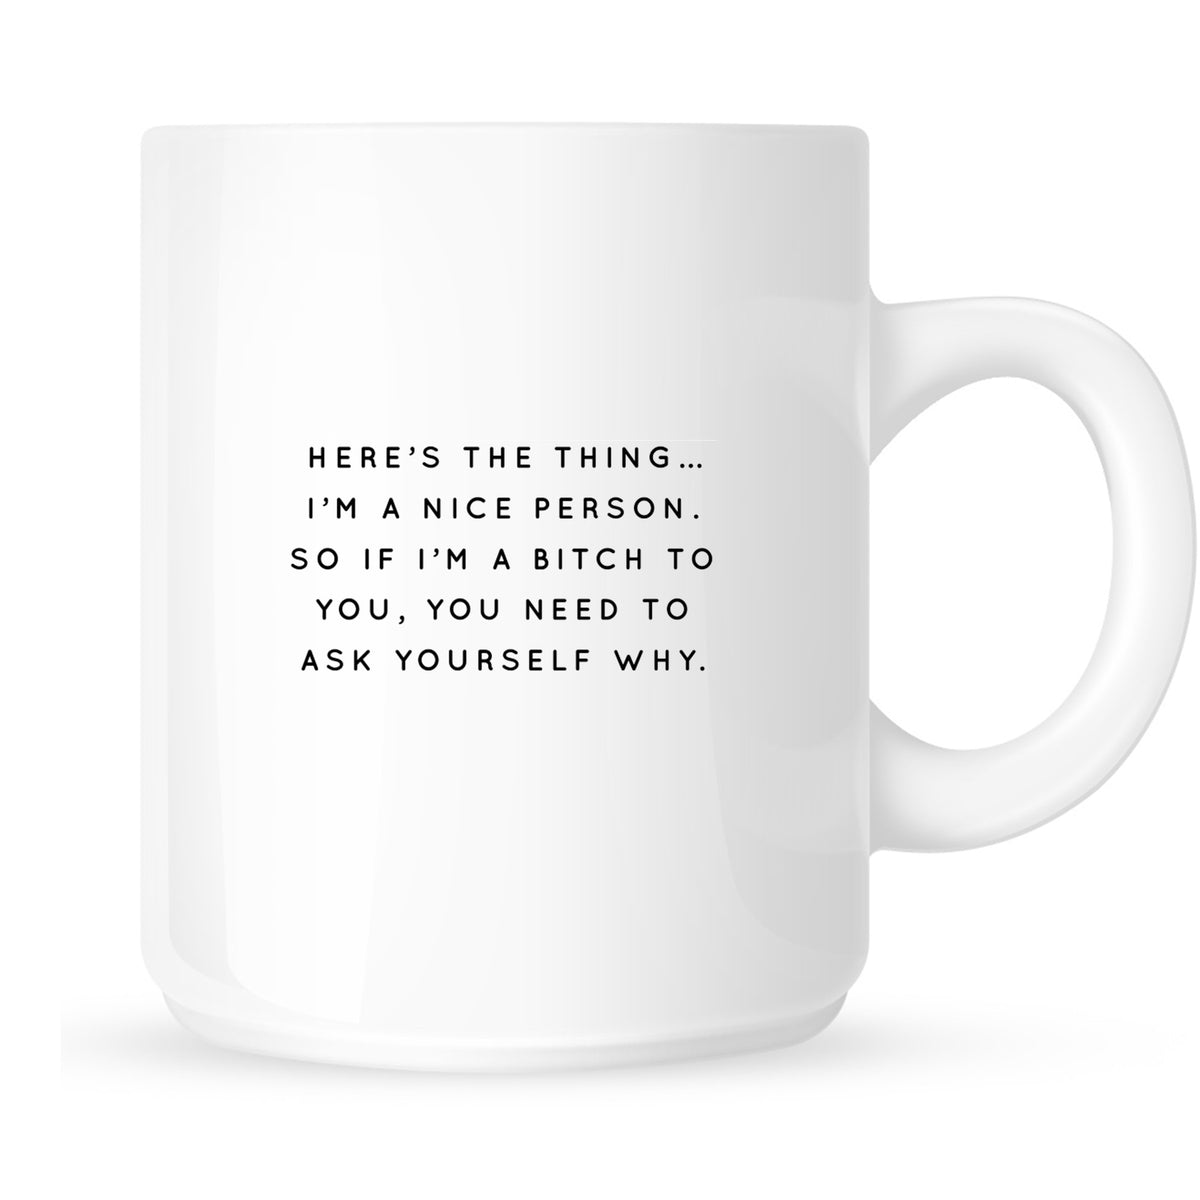 Mug - Here's the Thing... I'm a Nice Person so if I'm a Bitch to You, You Need to Ask Yourself Why